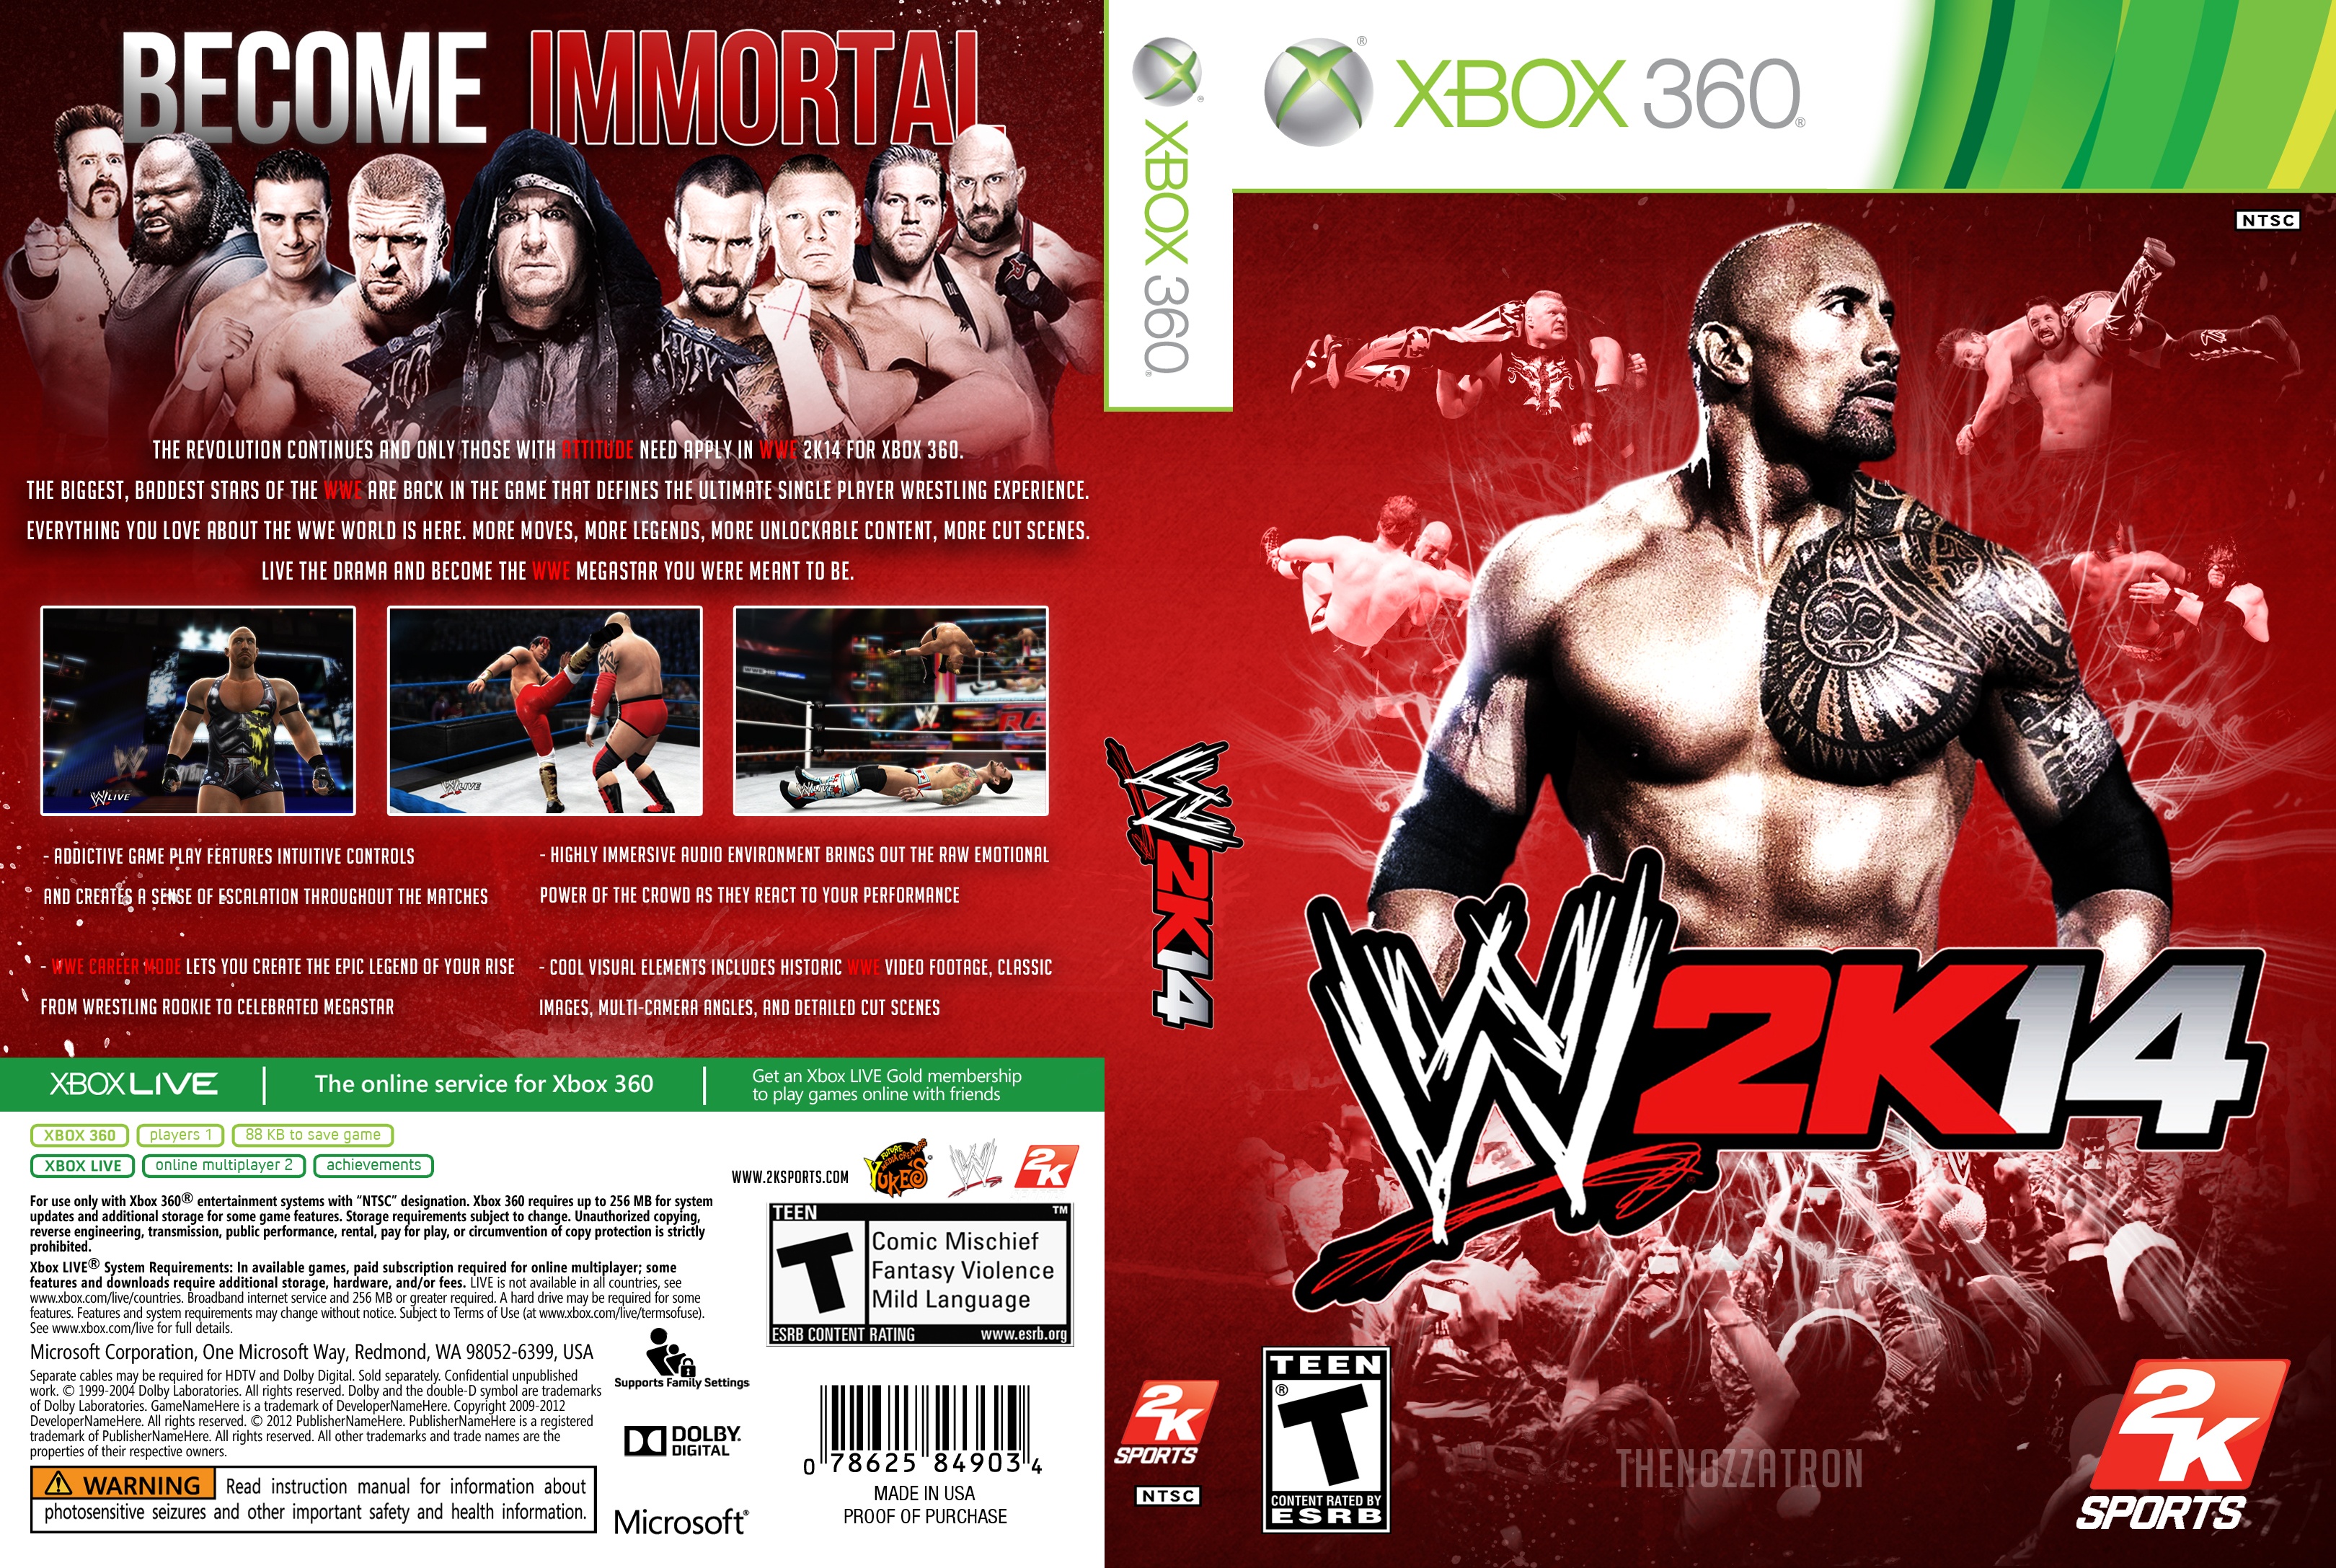 WWE 2K14 Become Immortal box cover